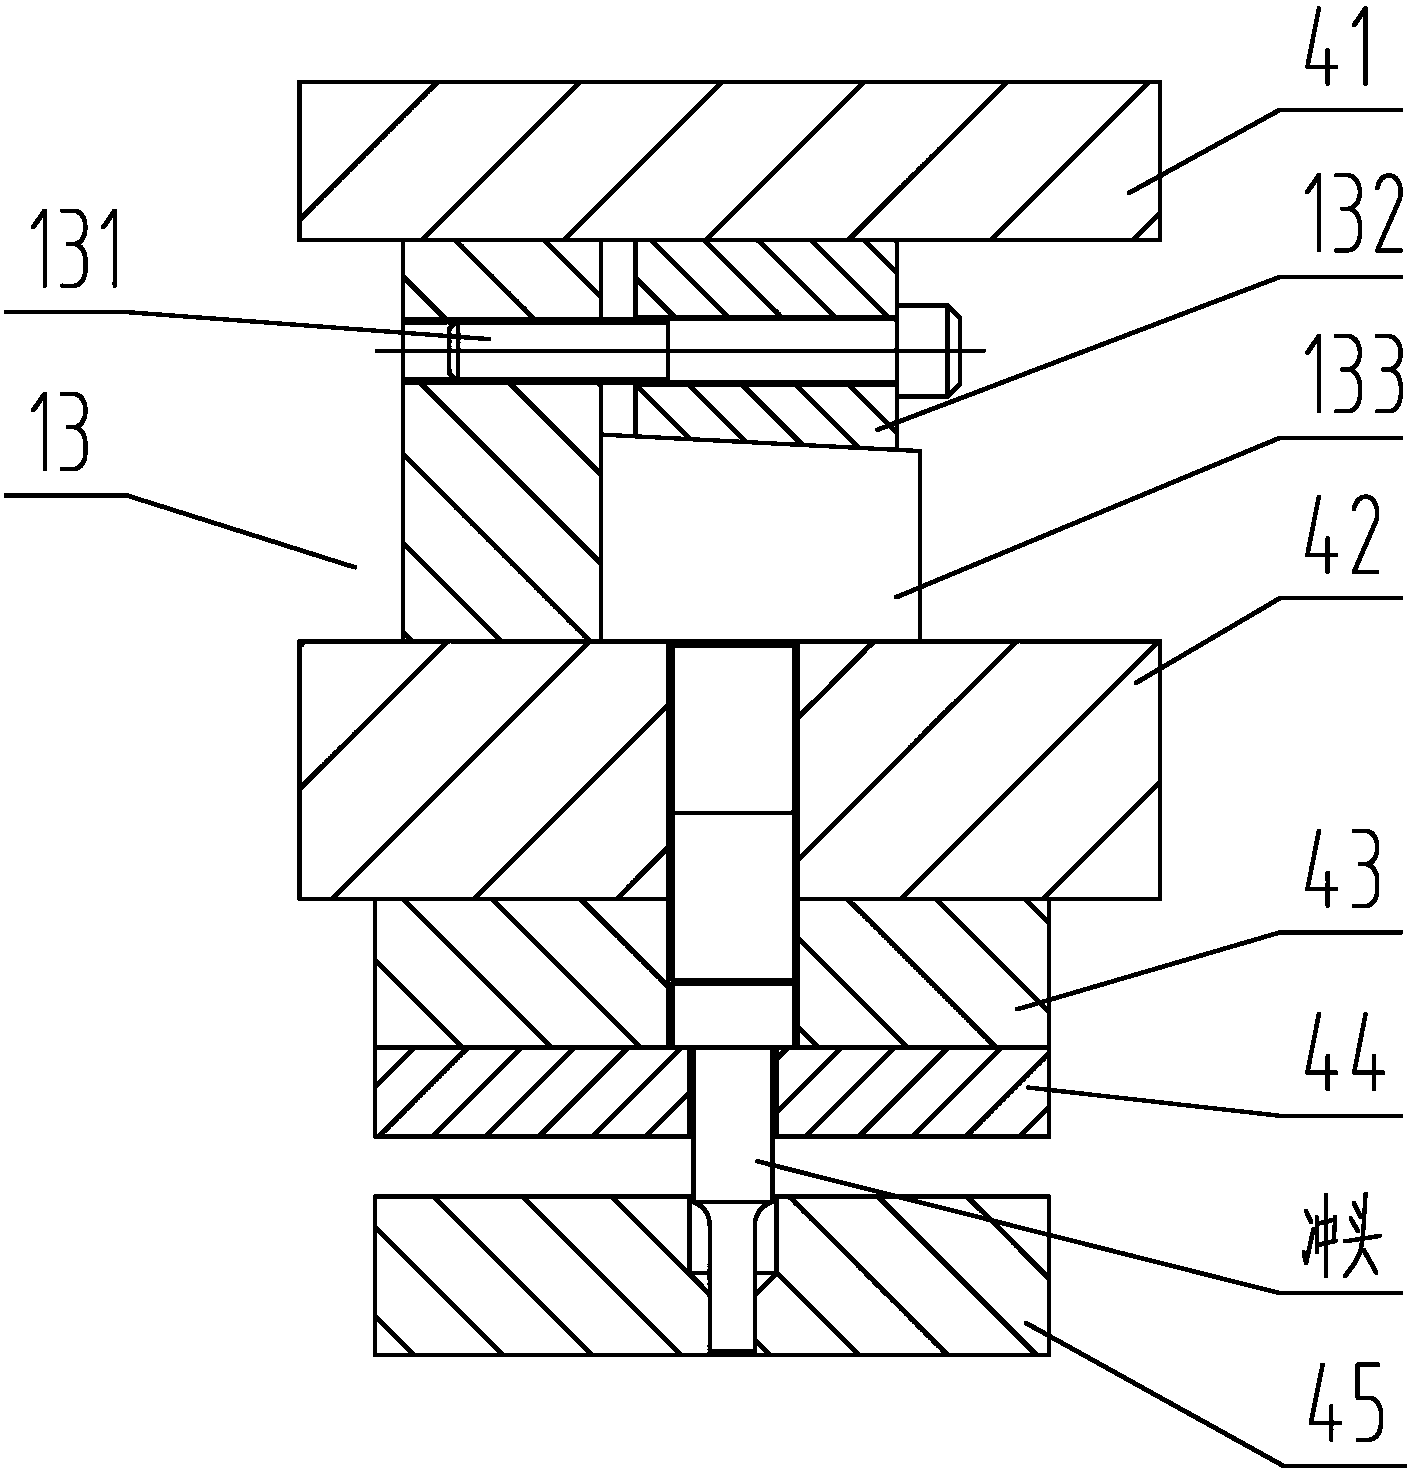 Brake shoe bending plate continuous die and method for using continuous die to machine brake shoe bending plate